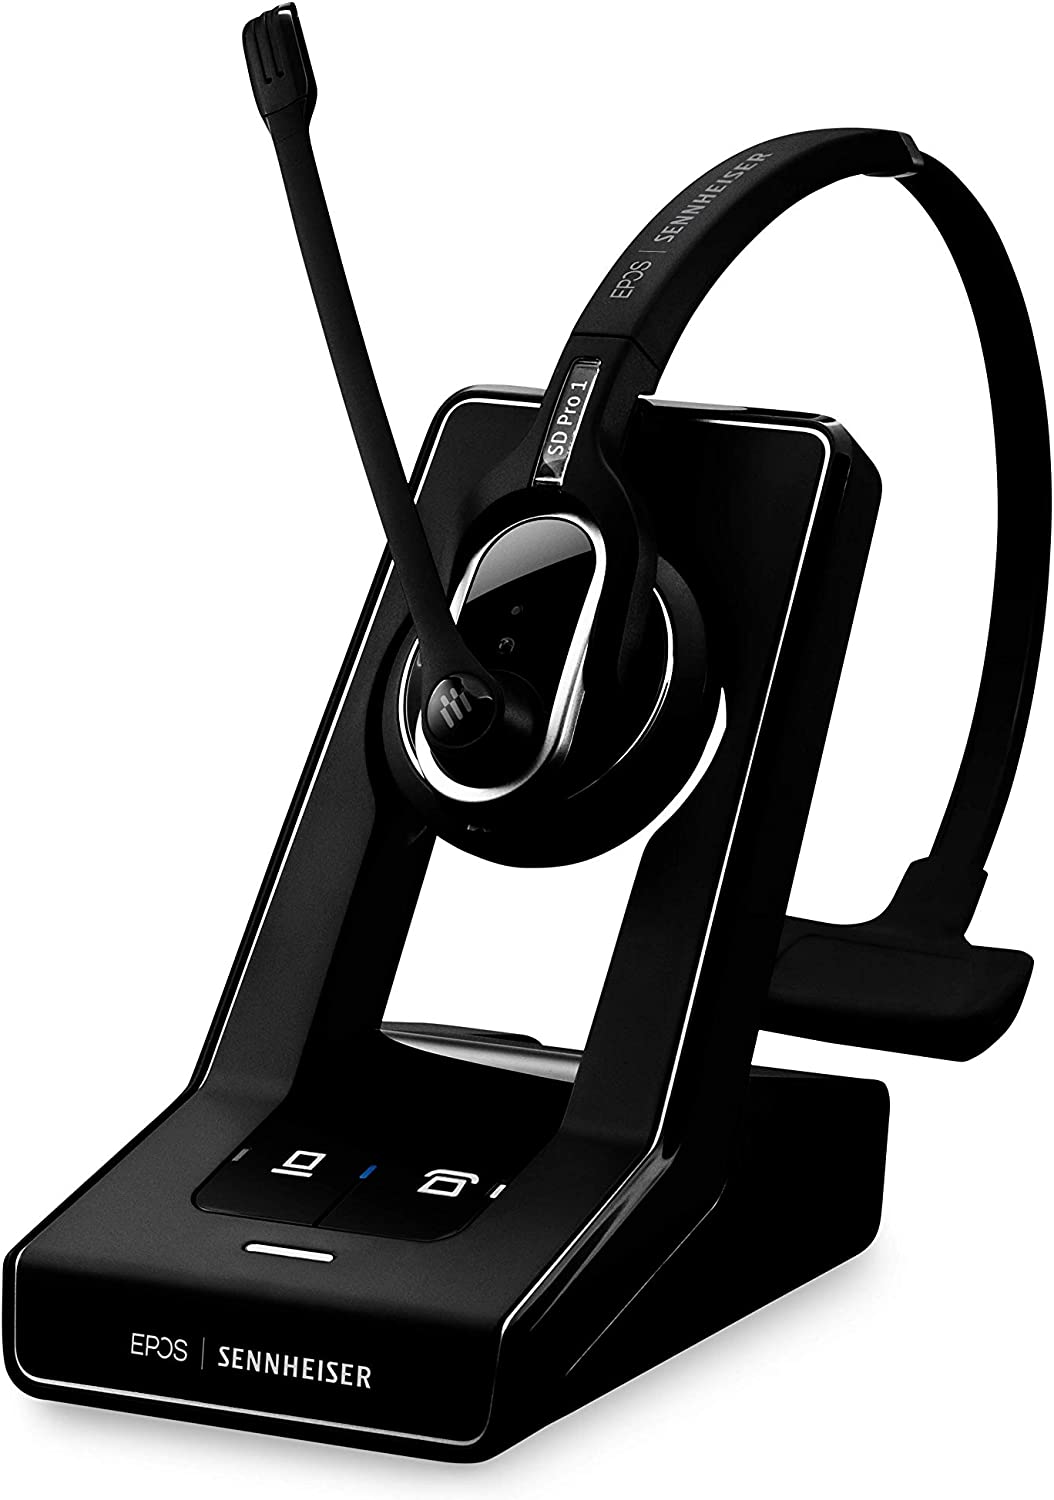 Sennheiser SD Pro 1 ML (506010) - Single-Sided, Multi Connectivity Wireless DECT Headset for Desk Phone &amp; Certified for Skype for Business, Ultra Noise-Cancelling Microphone (Black) SD Pro 1 ML Headset